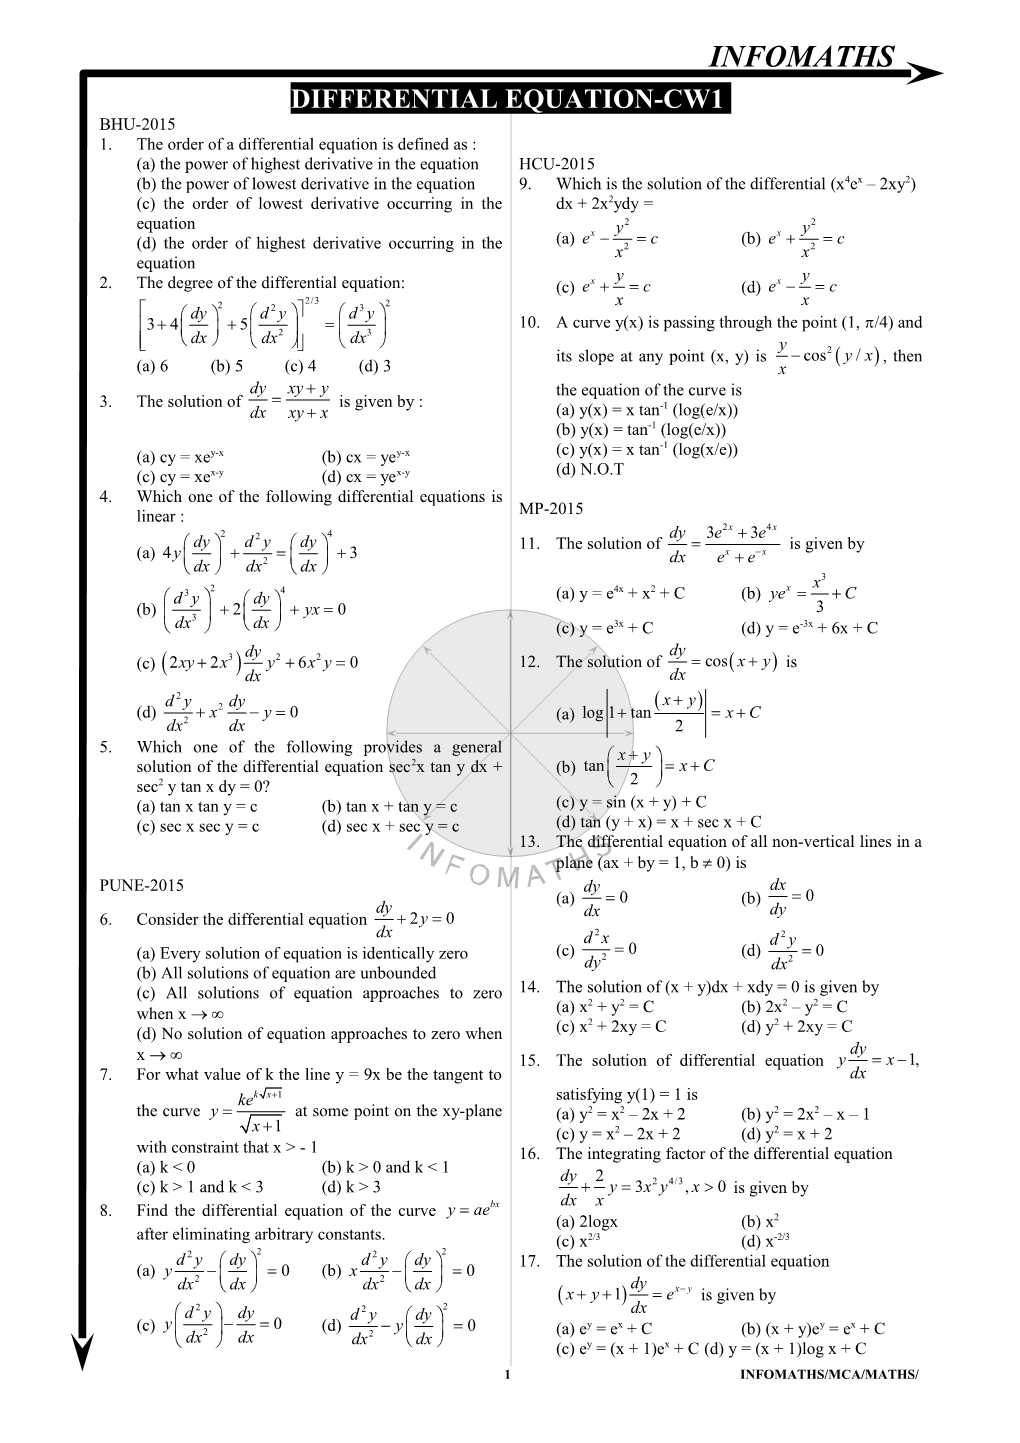 Differential Equation-Cw1